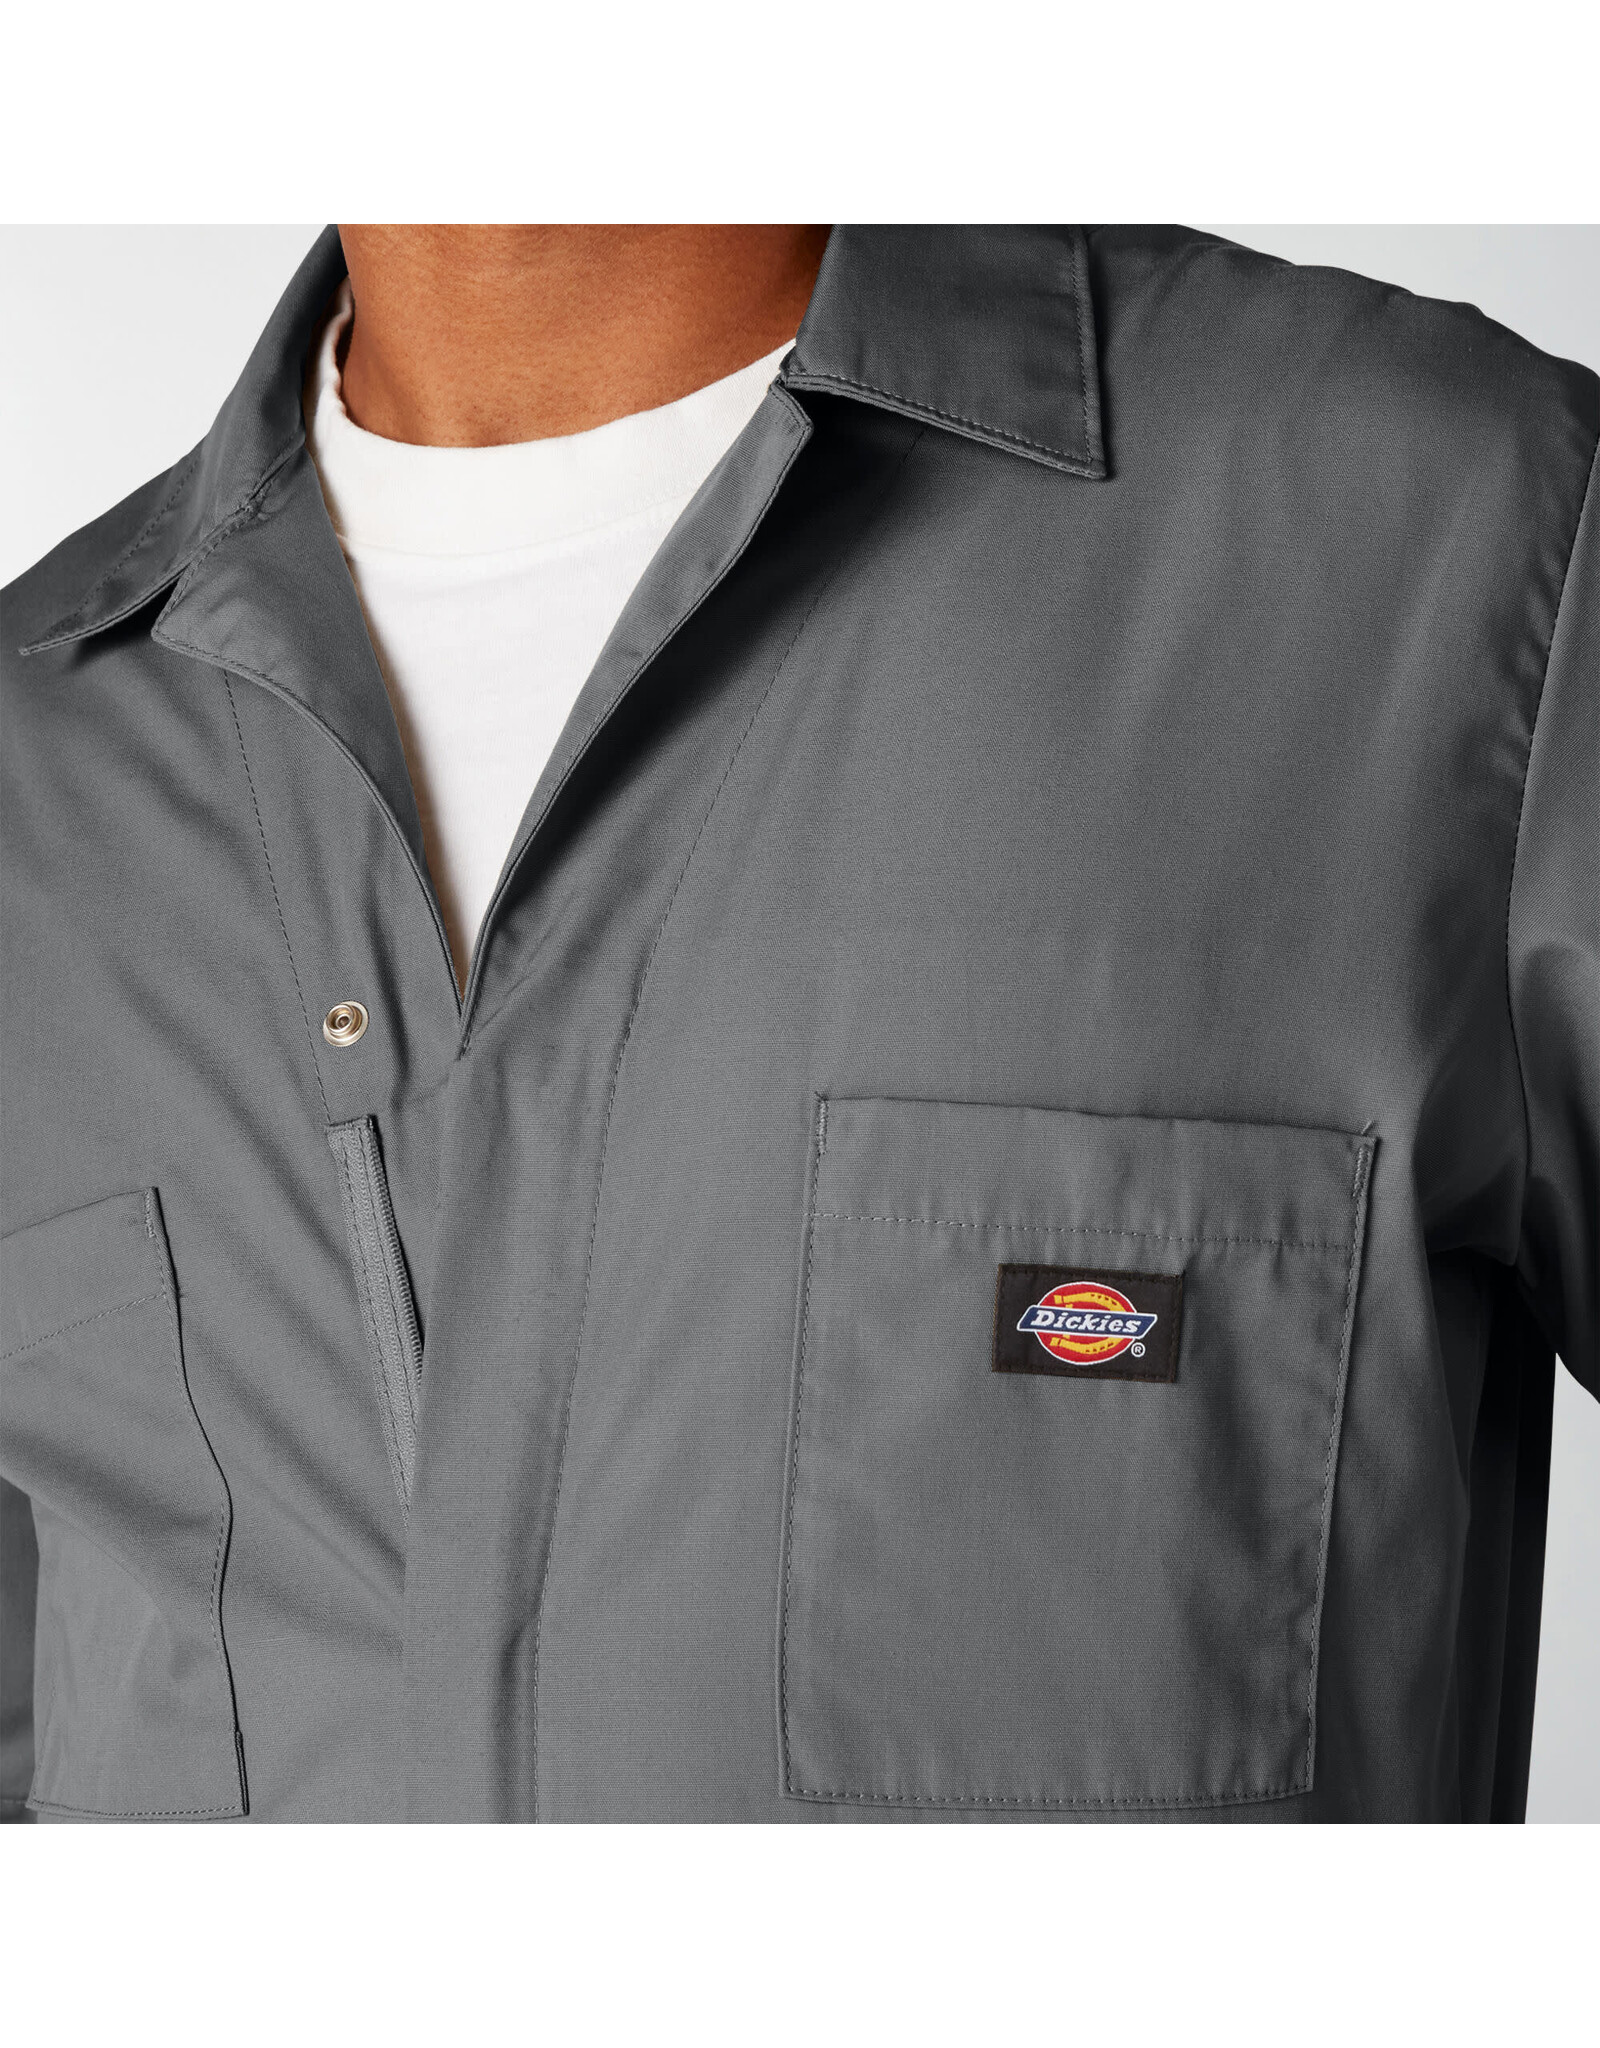 DICKIES Short Sleeve Coveralls Gray - 33999GY